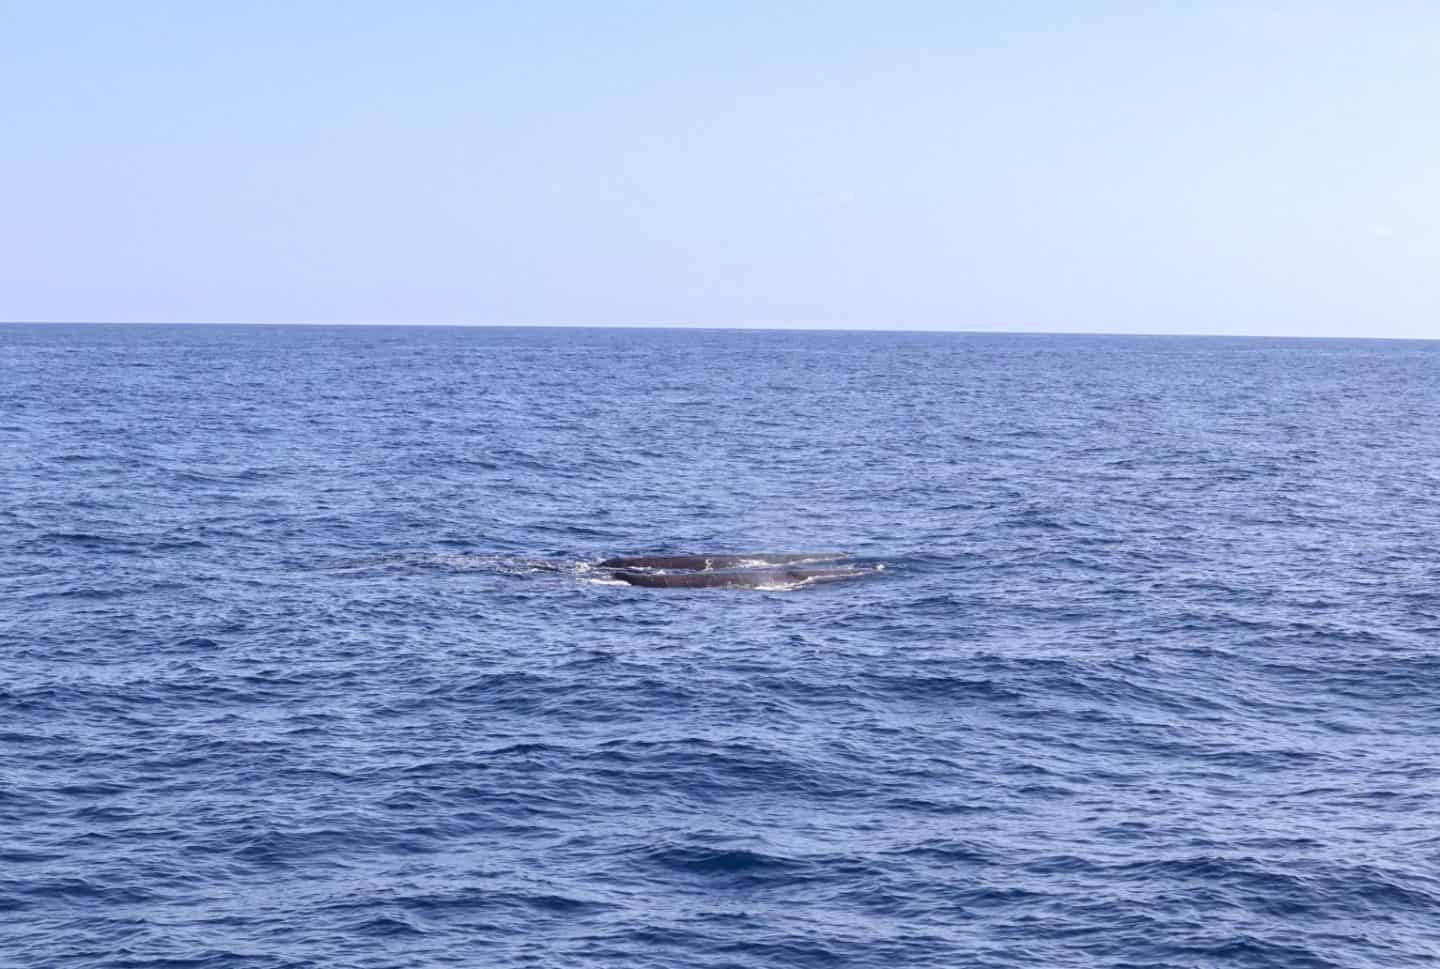 The Wandering Quinn Travel Blog dominica travel guide, 3 sperm whales in Dominica